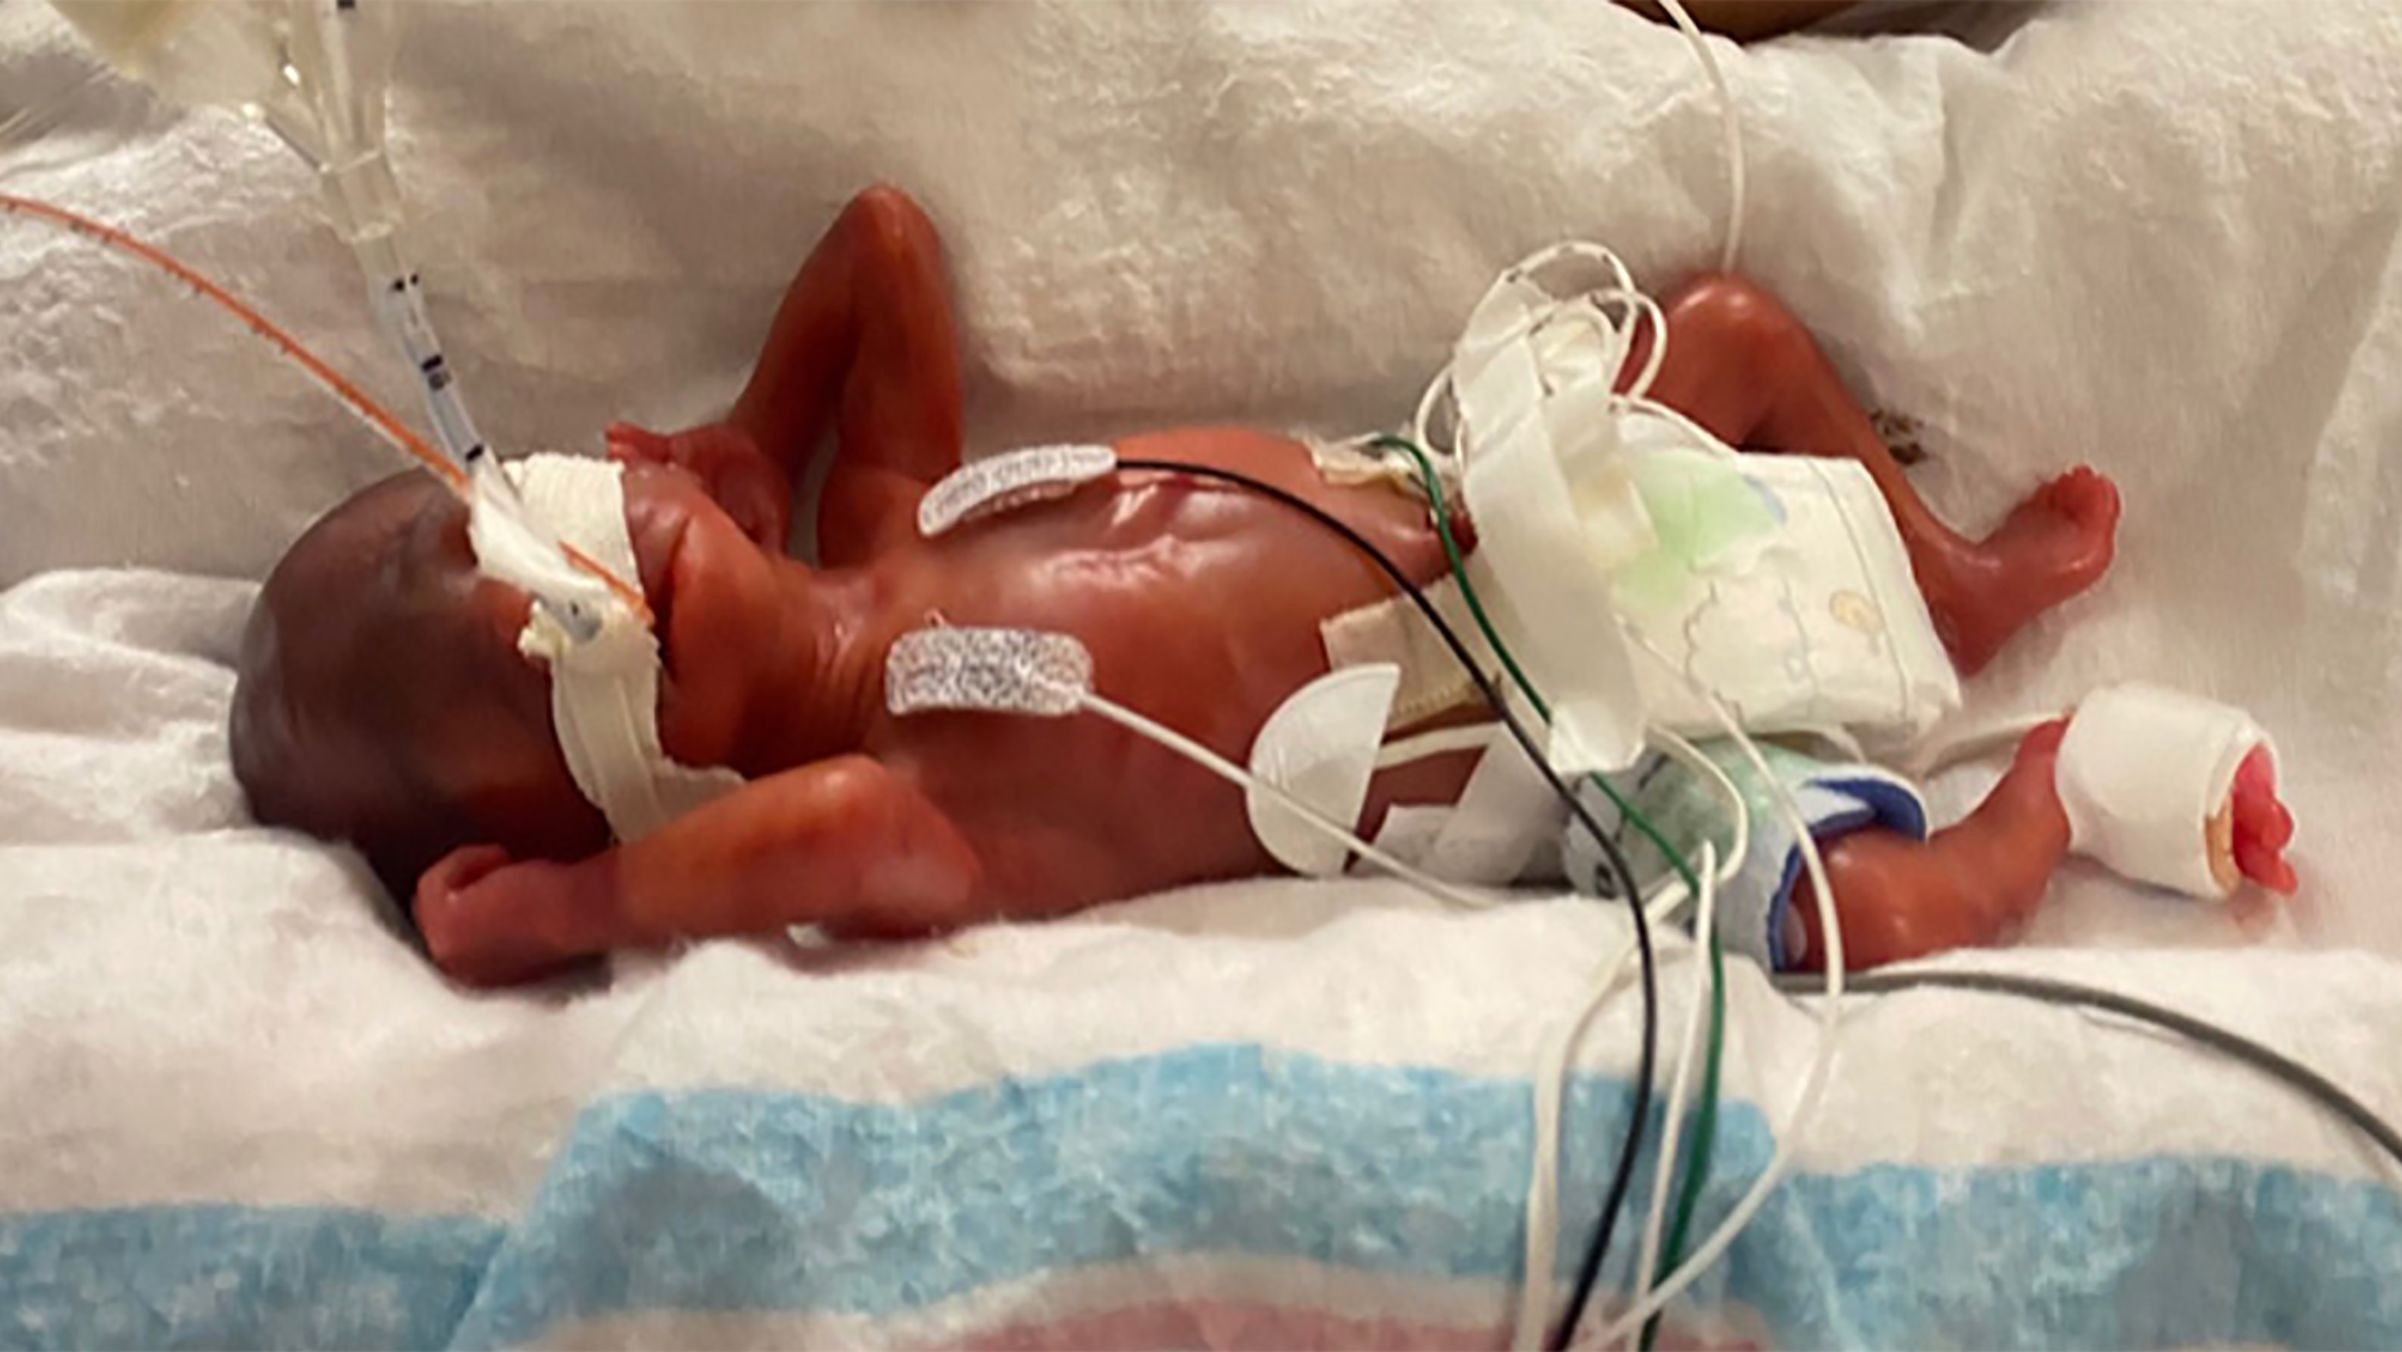 An Alabama baby was born less than 1 pound and at 21 weeks. Now he holds a  world record